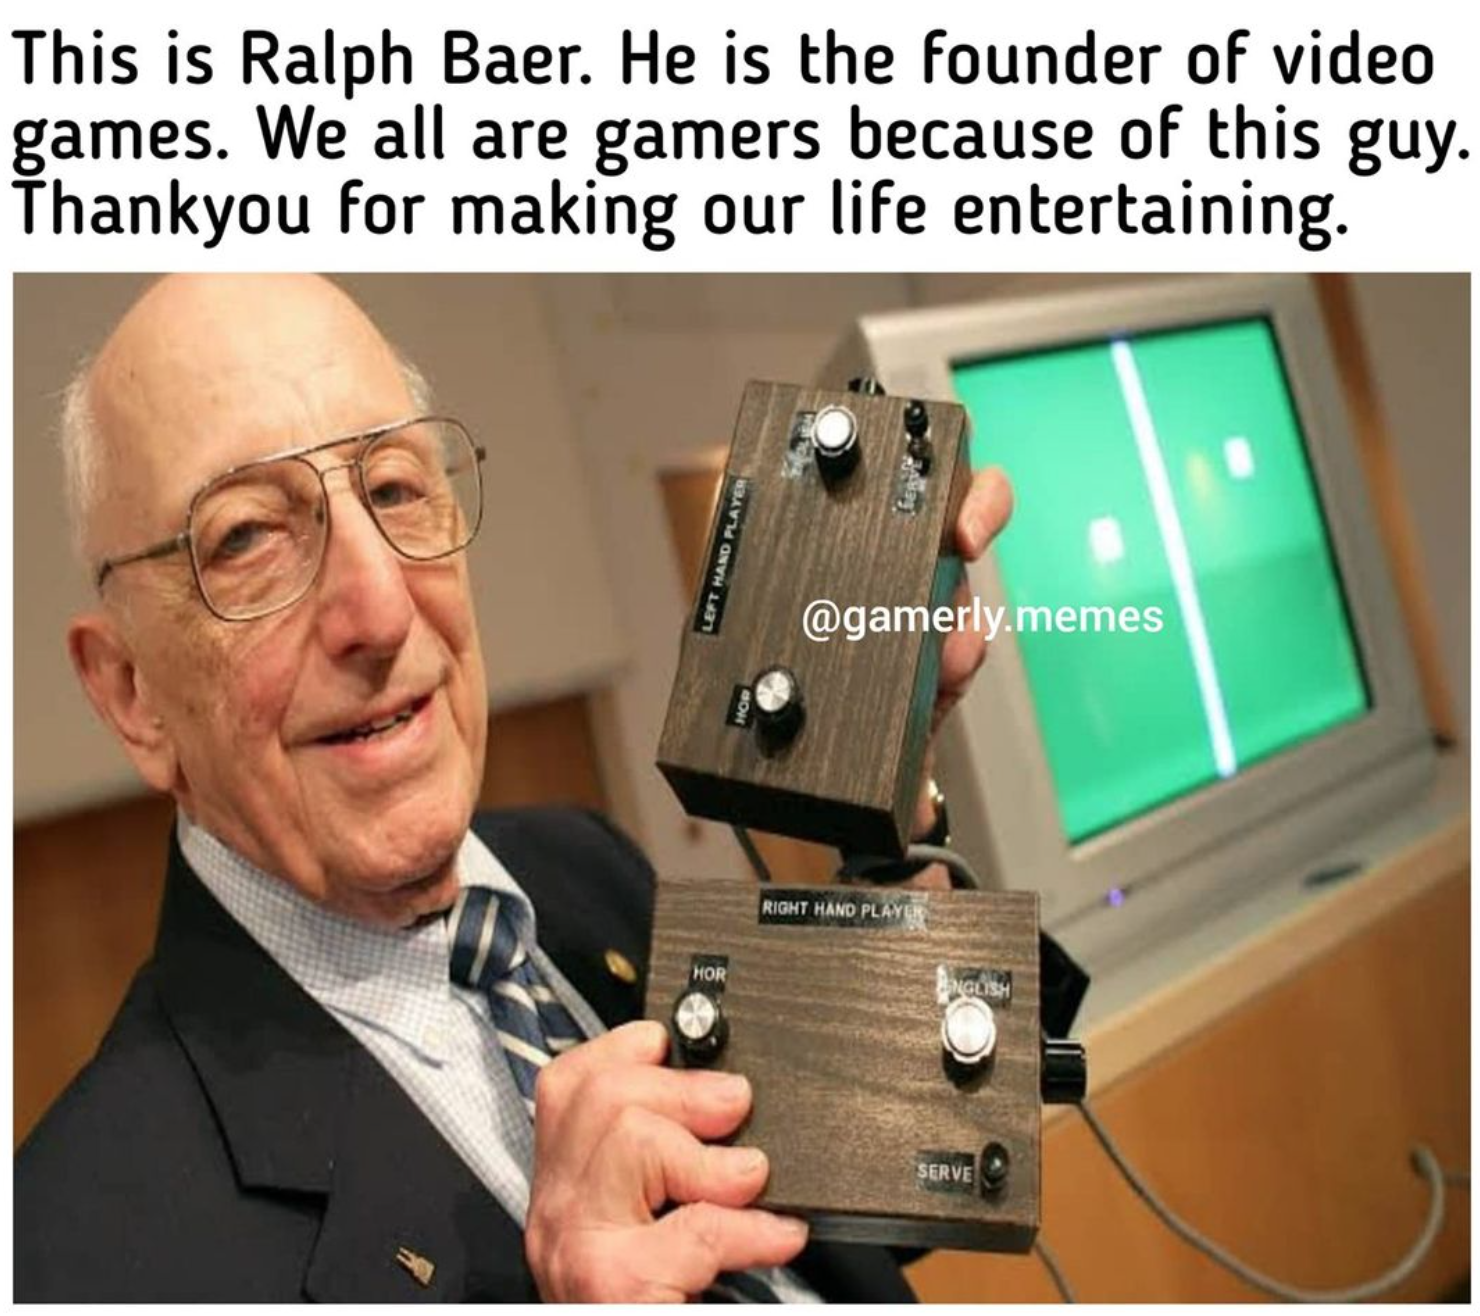 funny gaming memes - ralph baer - This is Ralph Baer. He is the founder of video games. We all are gamers because of this guy. Thankyou for making our life entertaining. Left Handa .memes Rint Hand Play Hor Sove